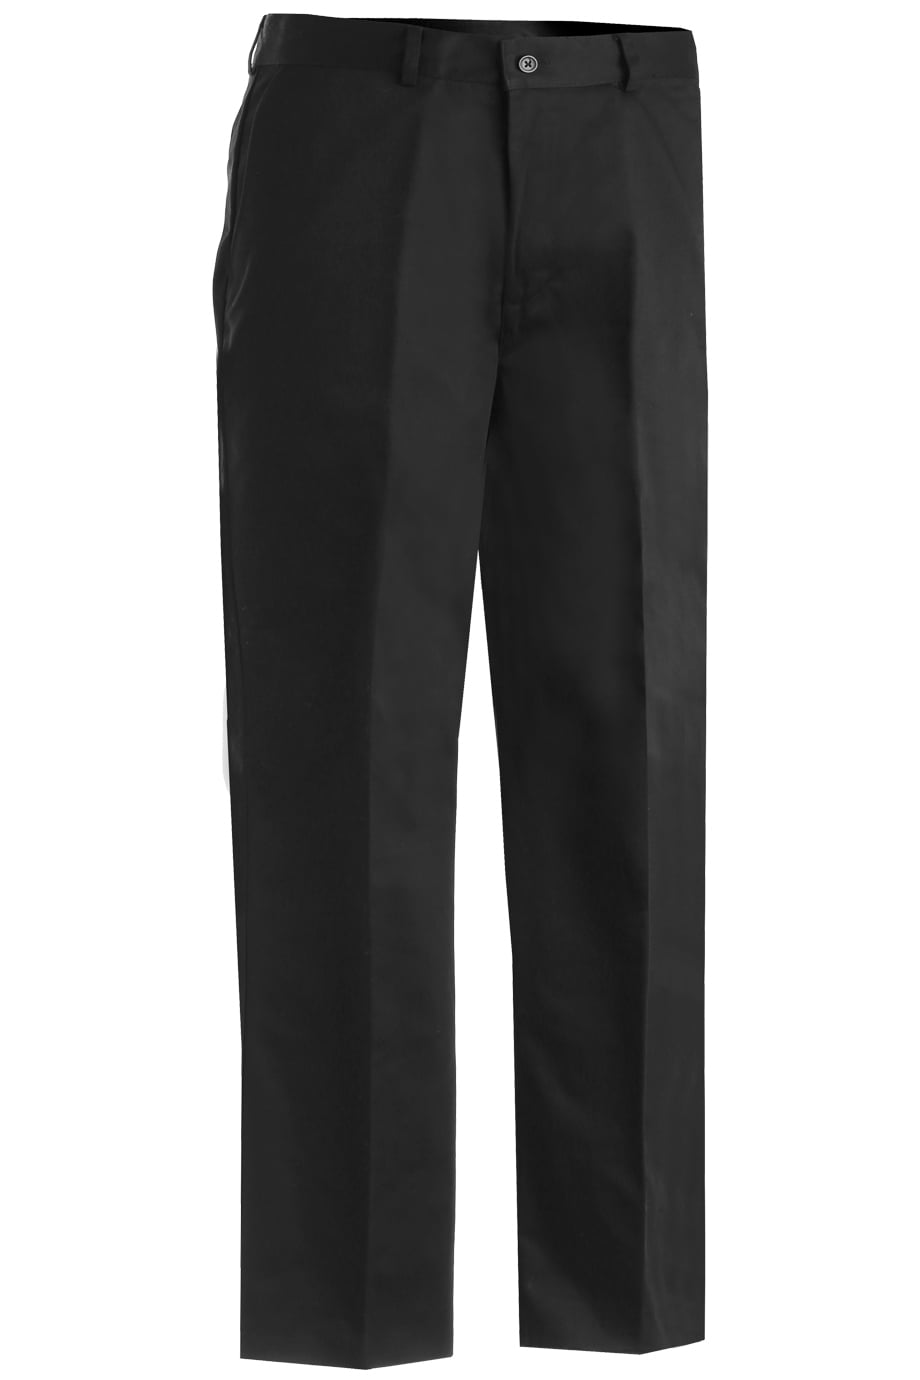 Edwards MENS EASY FIT CHINO FLAT FRONT PANT